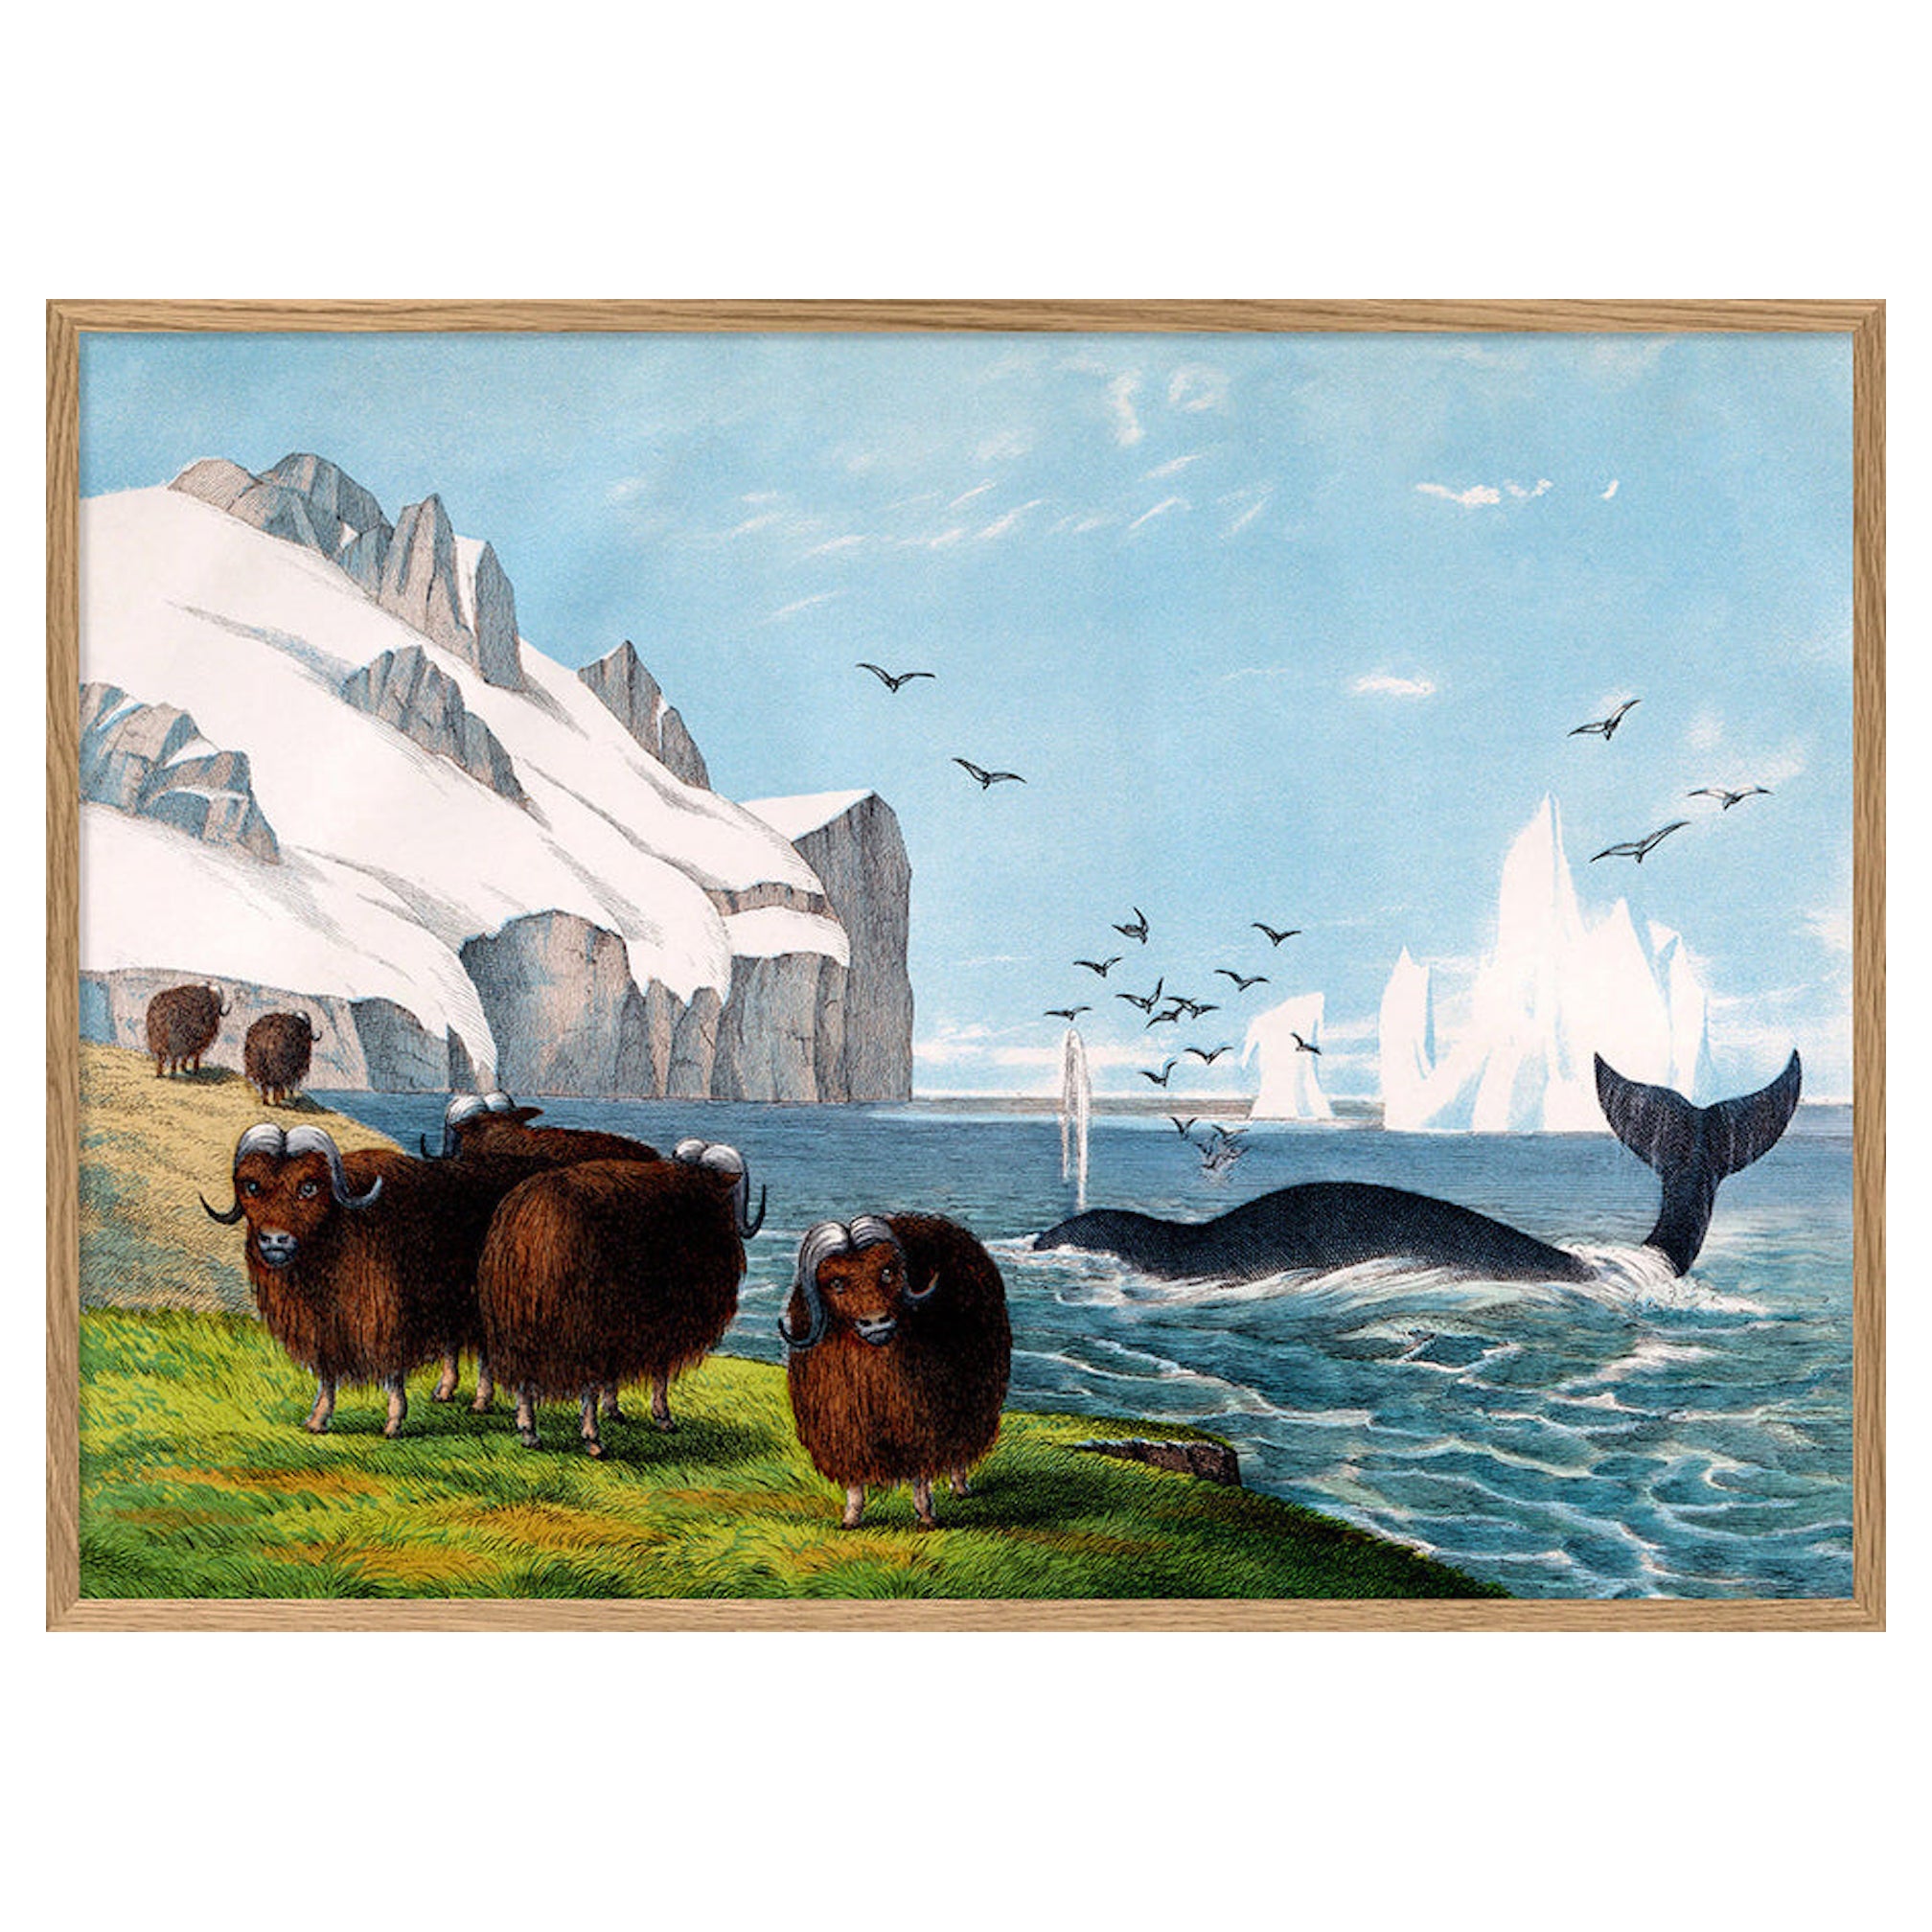 Beautiful Framed Drawing Print of "the Muskox"